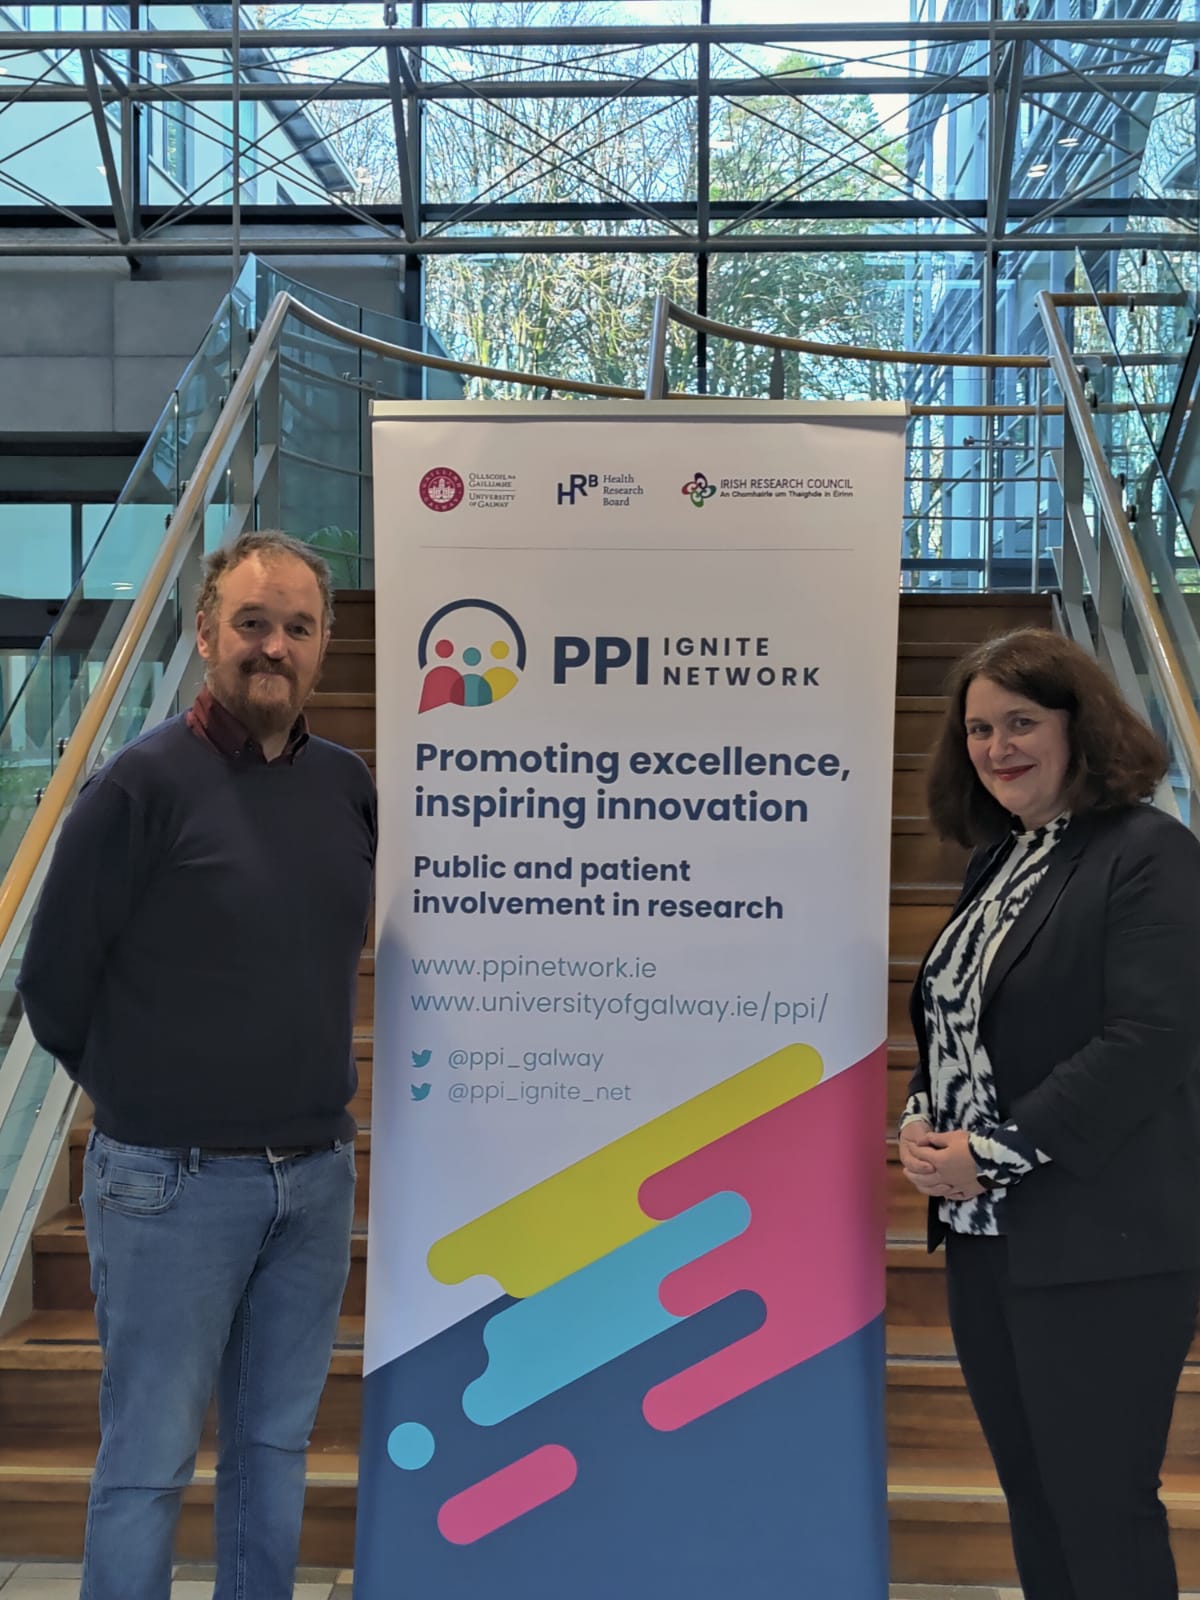 Brendan Dolan Postdoctoral researcher in the PPI Ignite Network @ University of Galway standing with awardee Yvonne Fitzmaurice